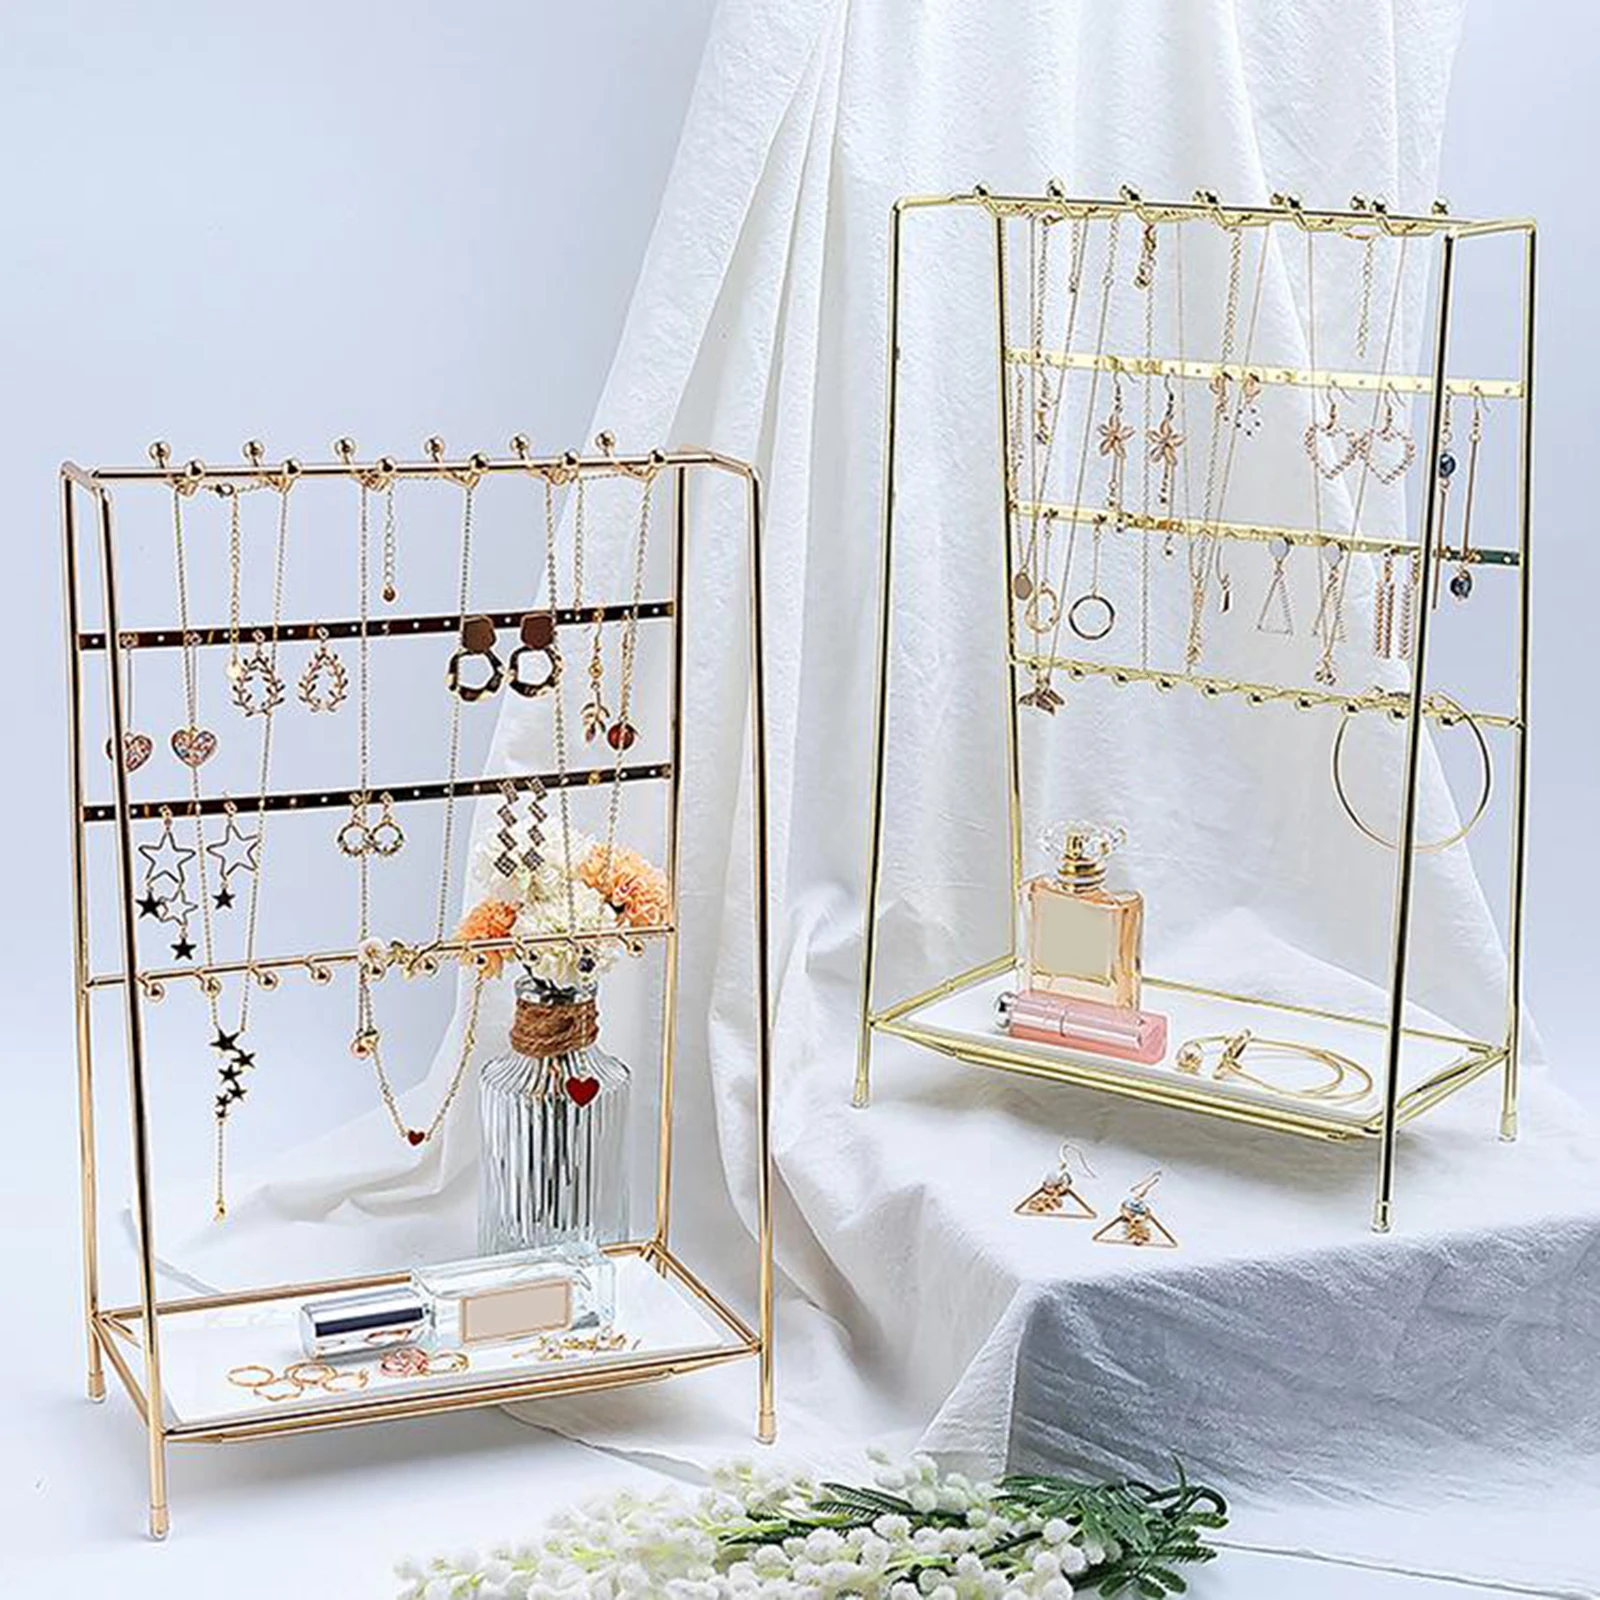 Jewelry Organizer - Earring Holder, Hanging Jewelry Storage Rack for Bracelet Necklace Ring and Accessories